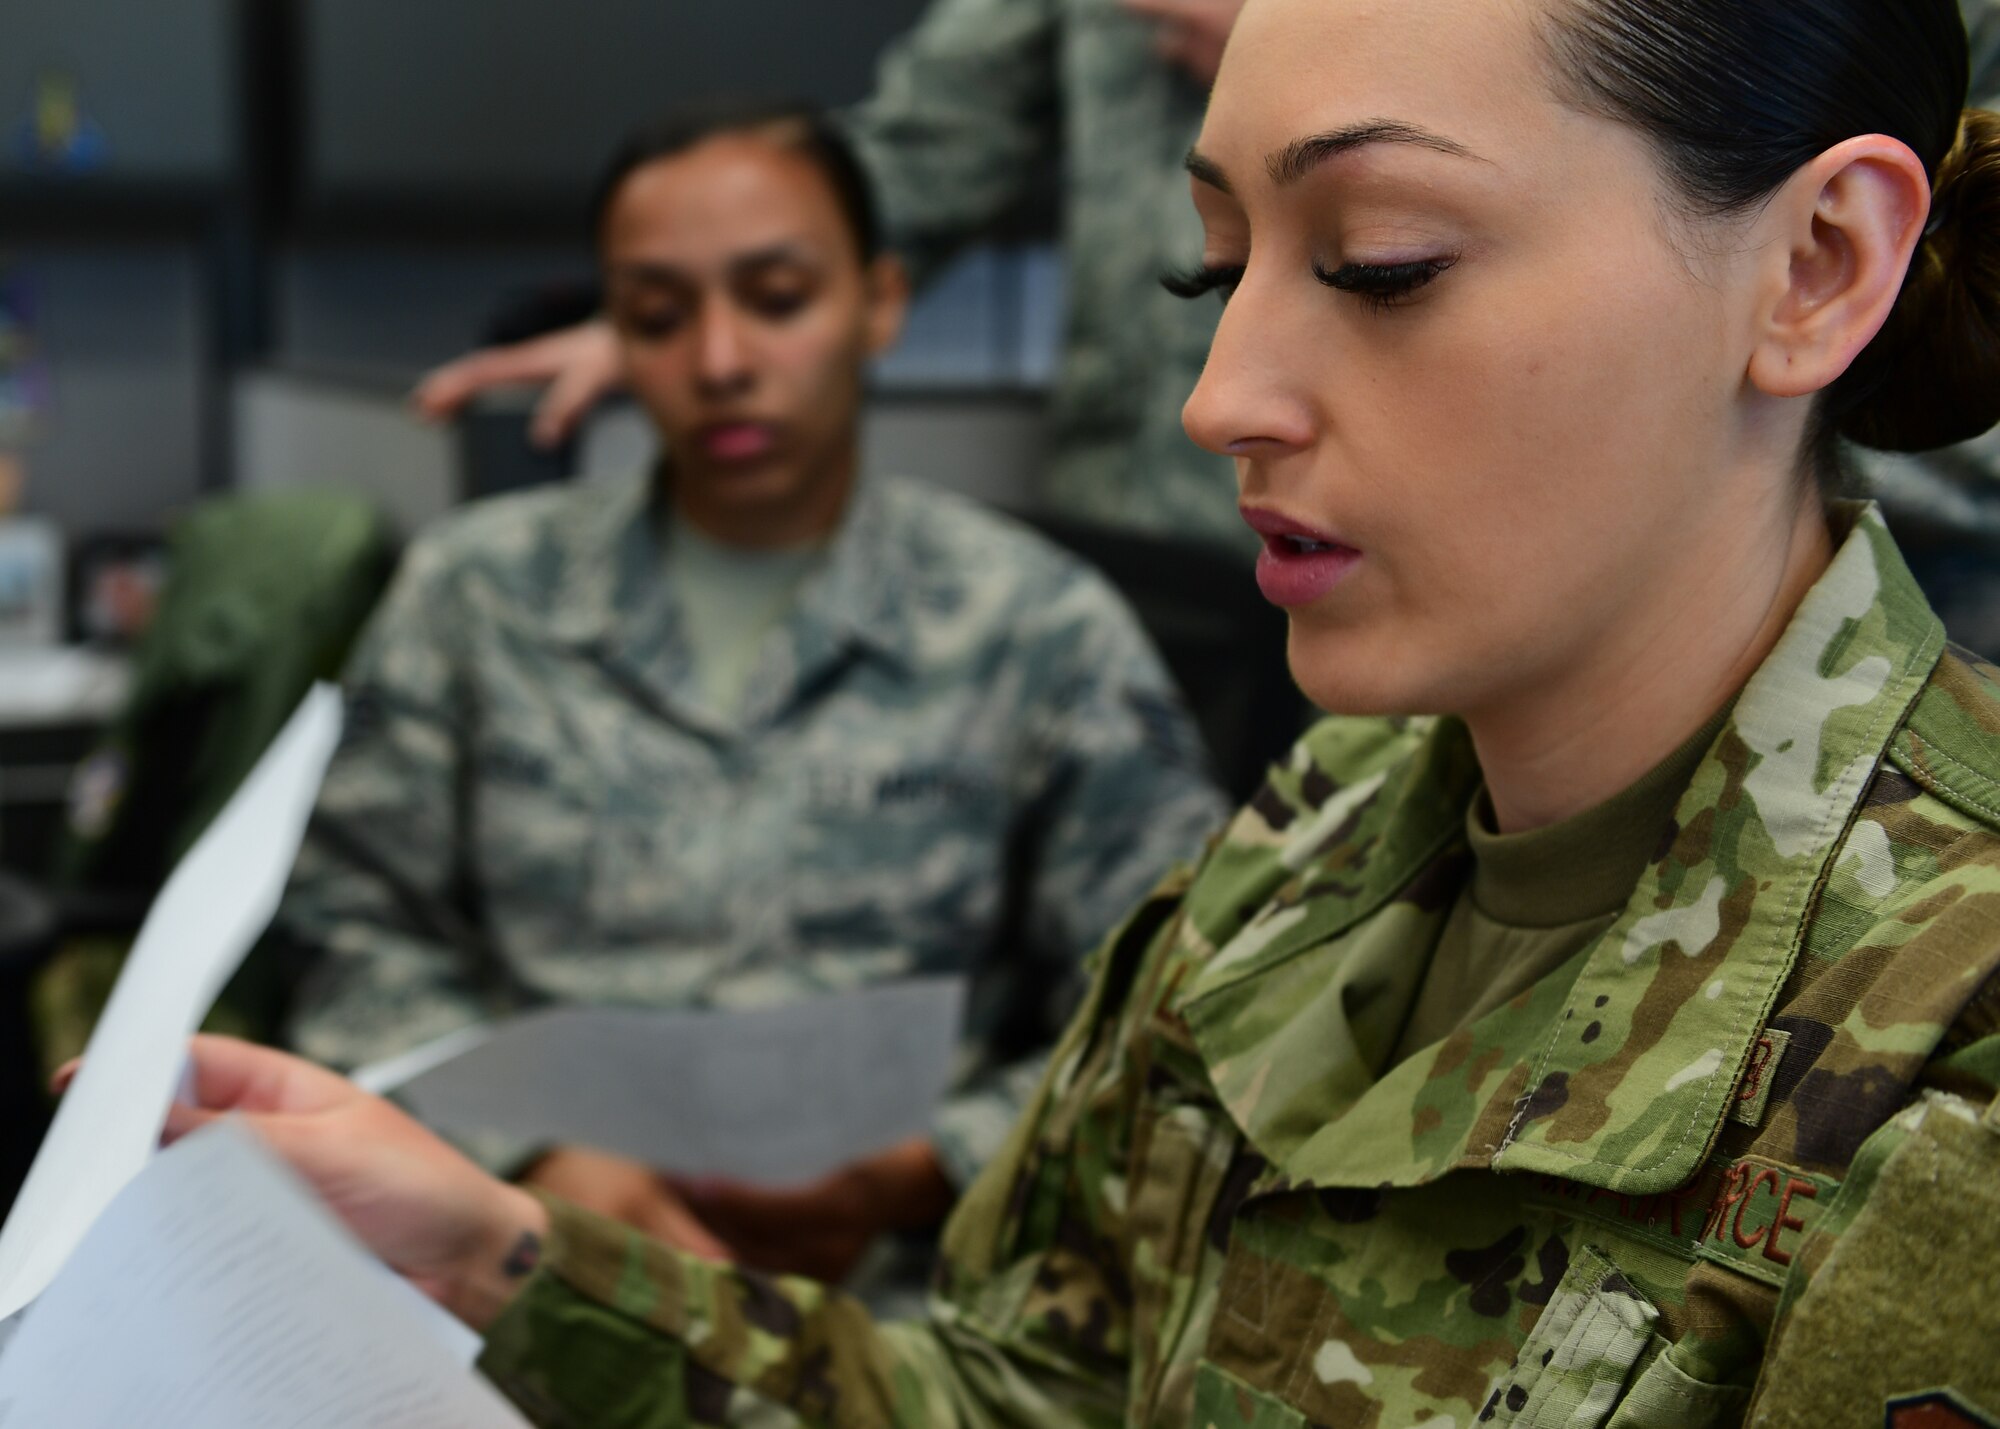 Staff Sgt. Karina Lopez, Aeromedical Evacuation duty controller with the 18th AE Detachment 1, based out of Joint Base Pearl Harbor-Hickam, Hawaii but attached to Kadena Air Base, Japan, goes through intake procedures with members of the 911th Aeromedical Evacuation Squadron at Joint Base Pearl Harbor-Hickam, Hawaii April 25, 2019. The training the 911th Airlift Wing Airmen received was meant to prepare new Airmen for deployment procedures. (U.S. Air Force Photo by Senior Airman Grace Thomson)